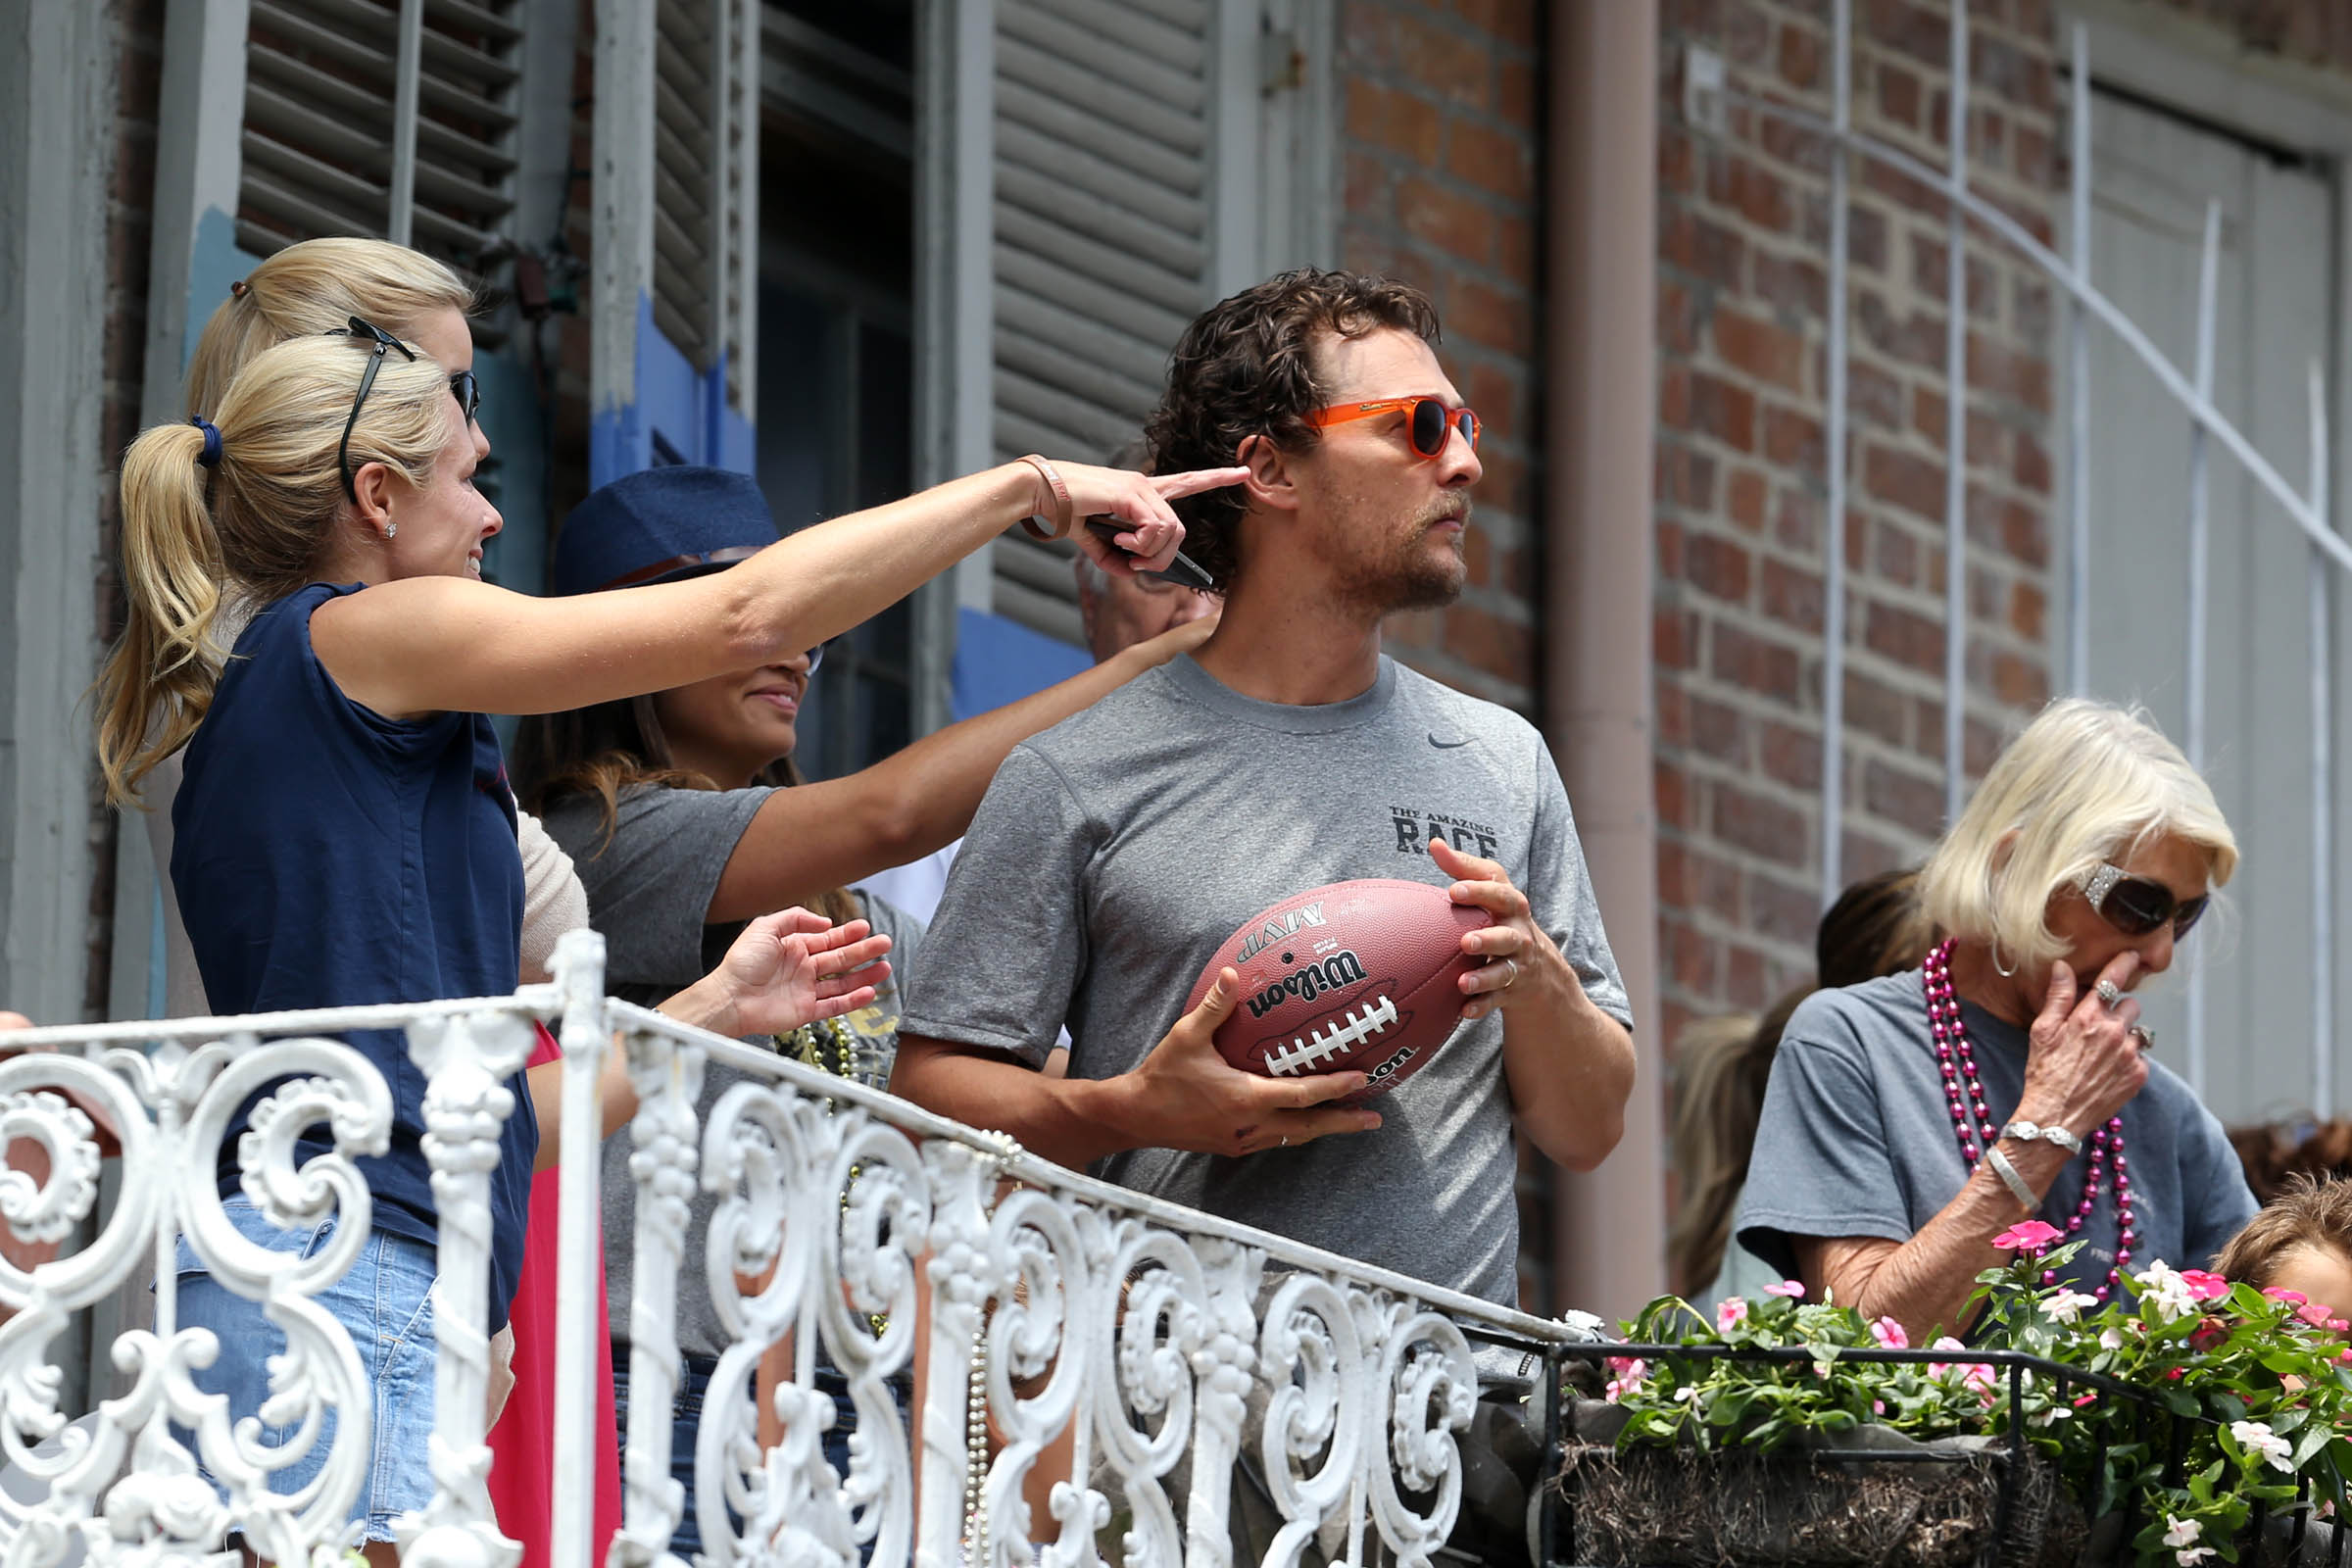 PHOTO: Brad Pitt and Matthew McConaughey chat with each other across balconies while McConaughey and his family participate in The Brees Dream Foundation charity fundraiser in New Orleans, Louisiana, May 17, 2014.